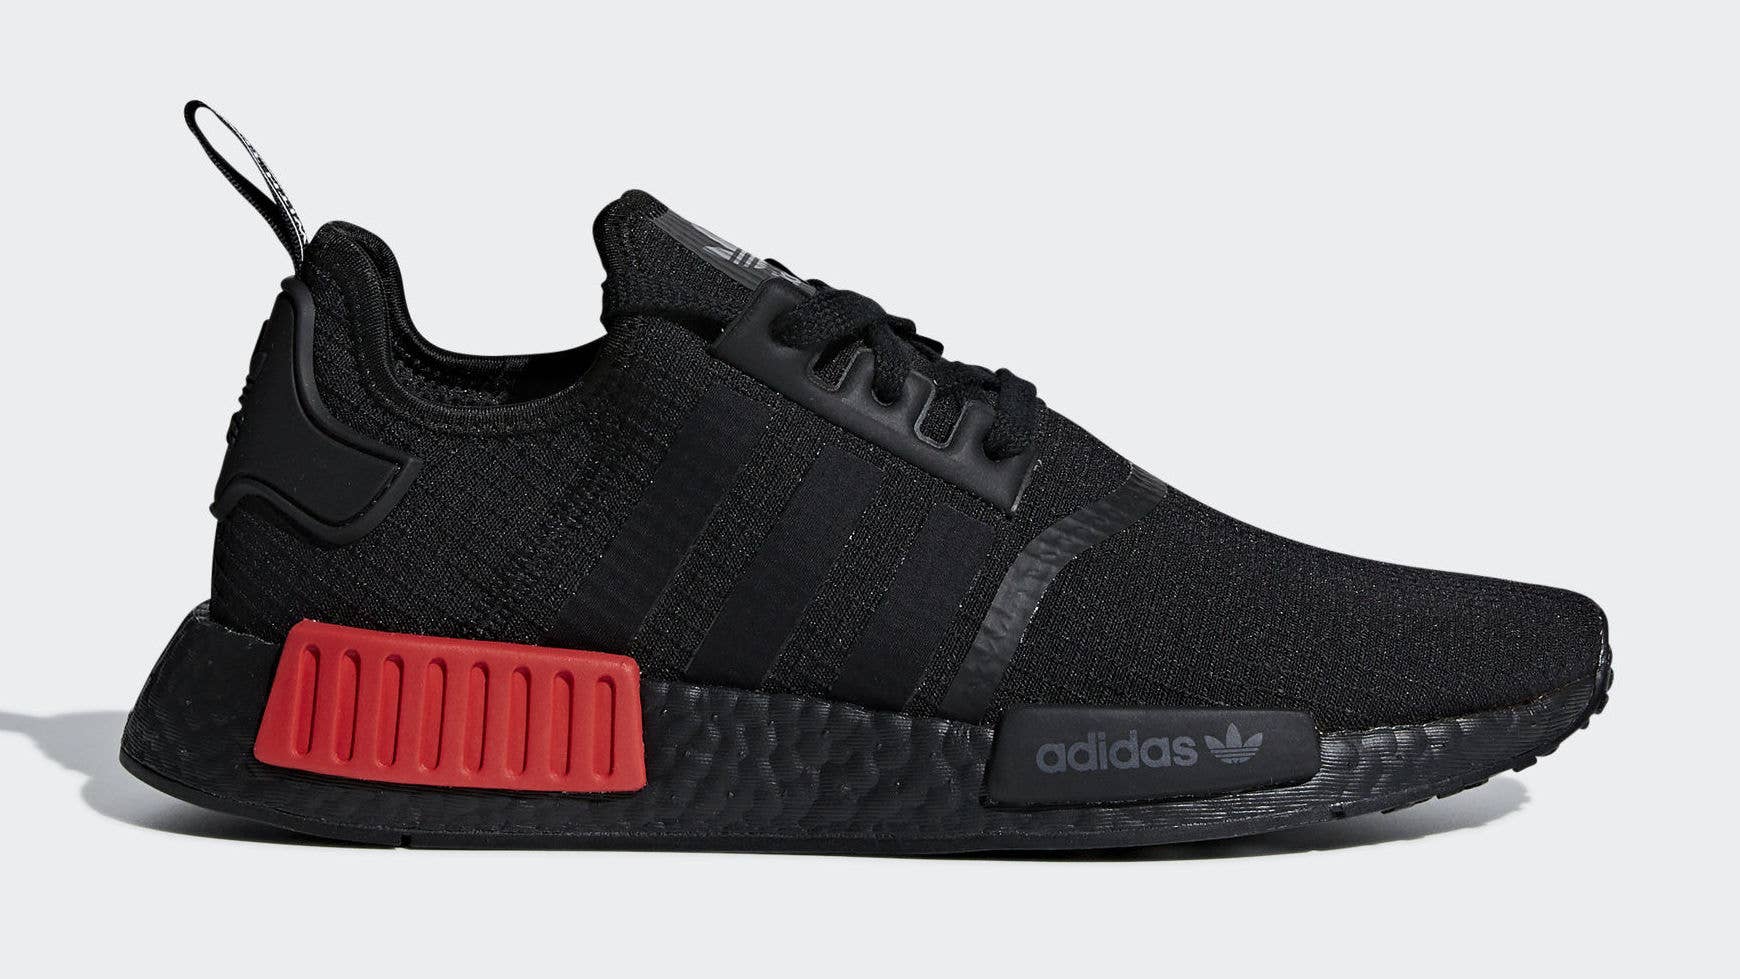 The Adidas NMD_R1 Is in 'Bred' Colorway Complex